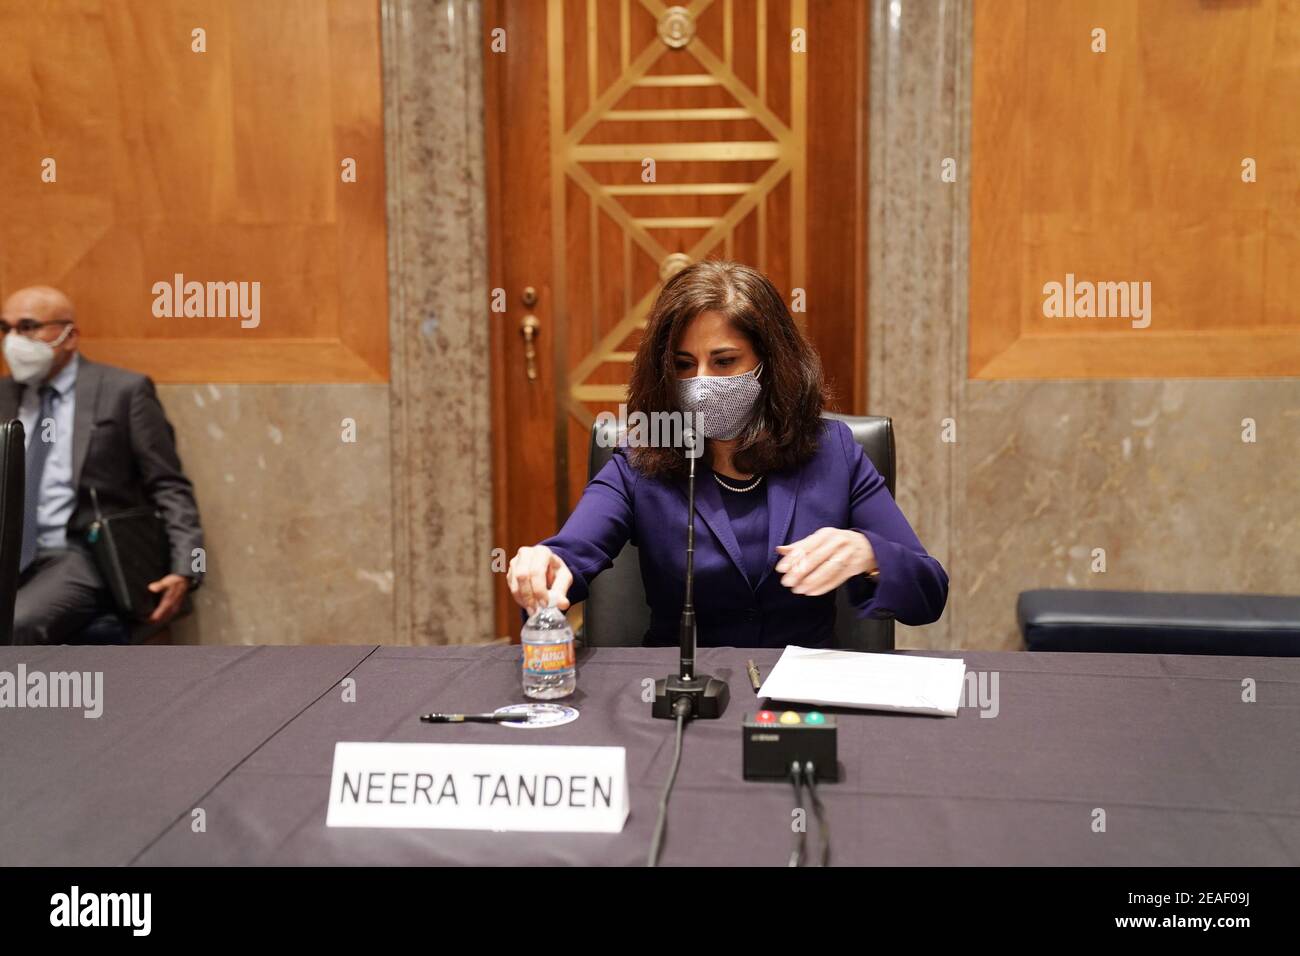 Washington DC, USA. 9th Feb 2021. Neera Tanden preparesto testify before the Senate Homeland Security and Government Affairs committee on her nomination to become the director of the Office of Management and Budget (OMB), during a hearing at the U.S. Capitol in Washington, DC on Tuesday, February 9, 2021. Tanden was nominated by President Joe Biden and is responsible for presenting the president's budget to congress. Photo by Leigh Vogel/UPI Credit: UPI/Alamy Live News Stock Photo